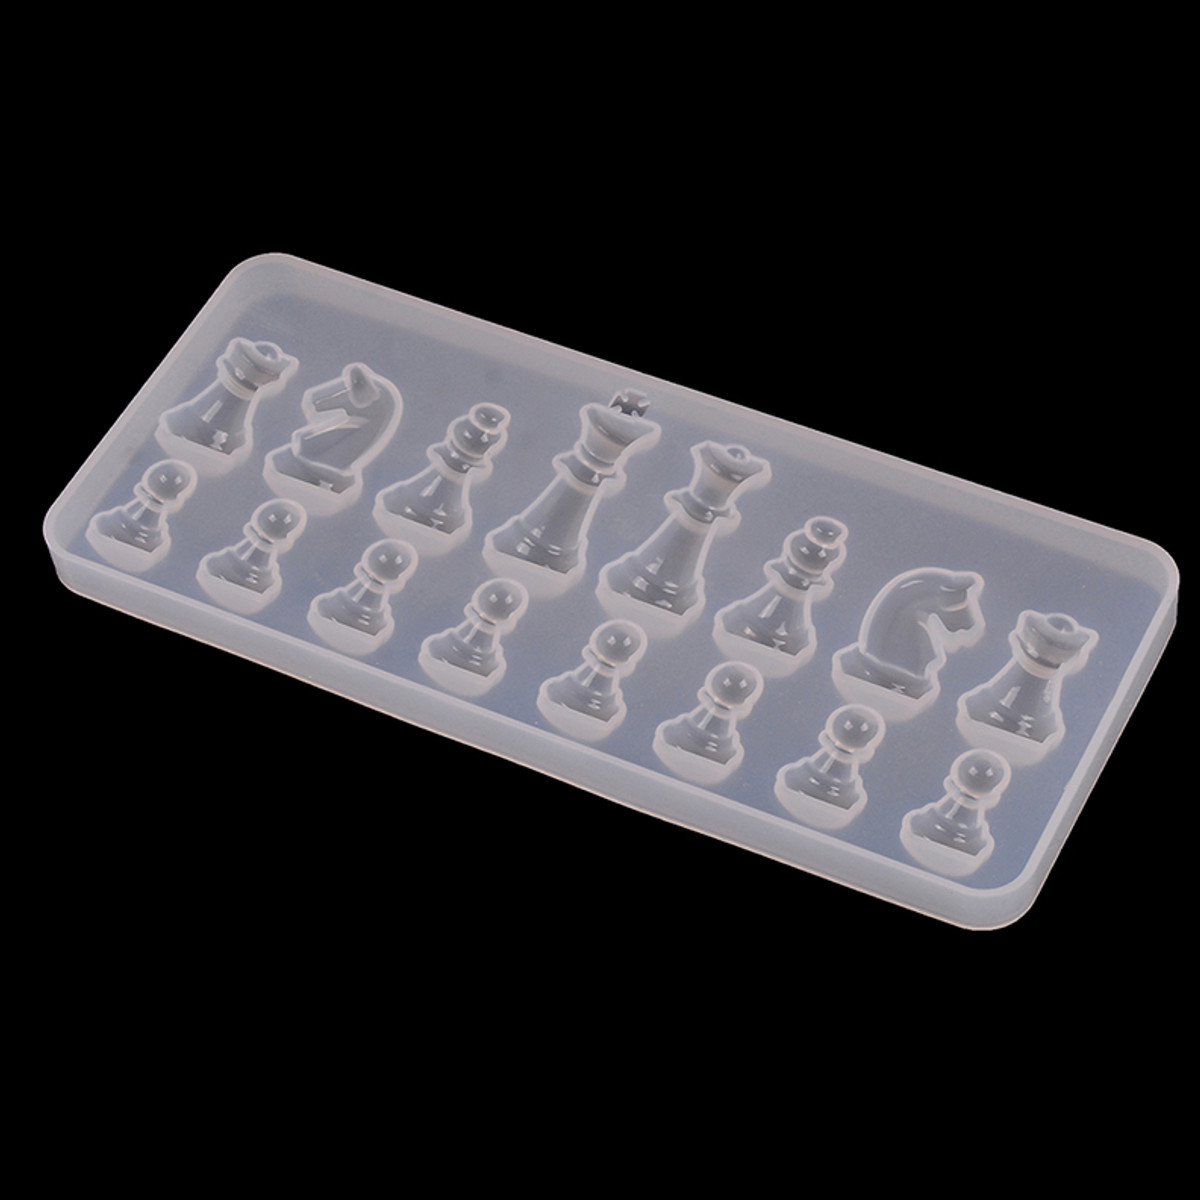 1PCS-Crystal-Chess-Silicone-Mold-for-DIY-Ornament-Resin-Casting-Craft-Mould-Tool-1714219